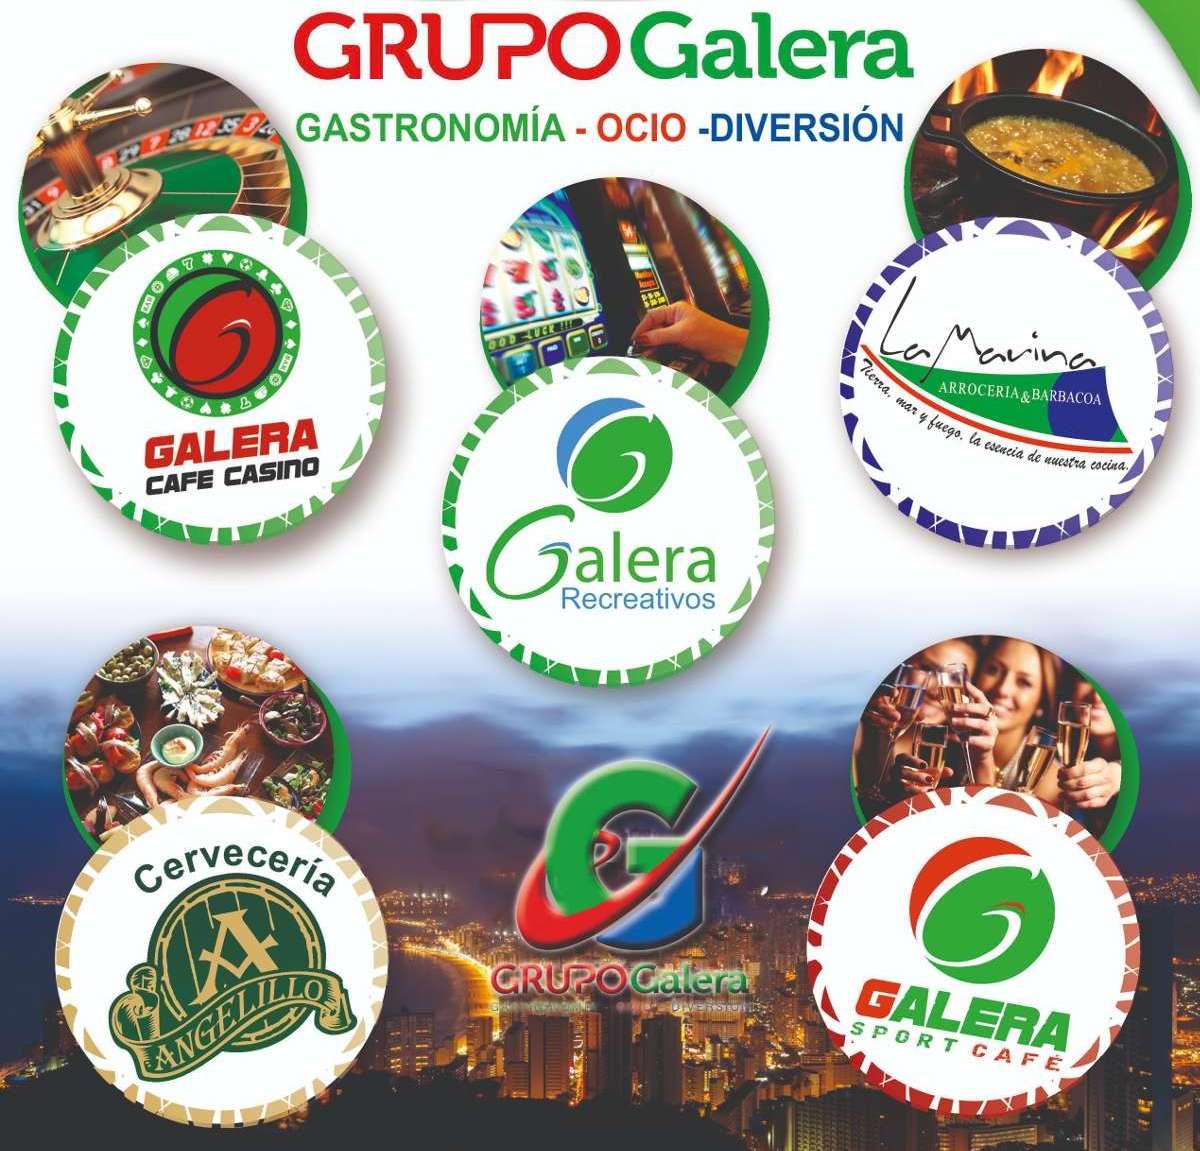 Agreements to support Benidorm sport by the Galera Group